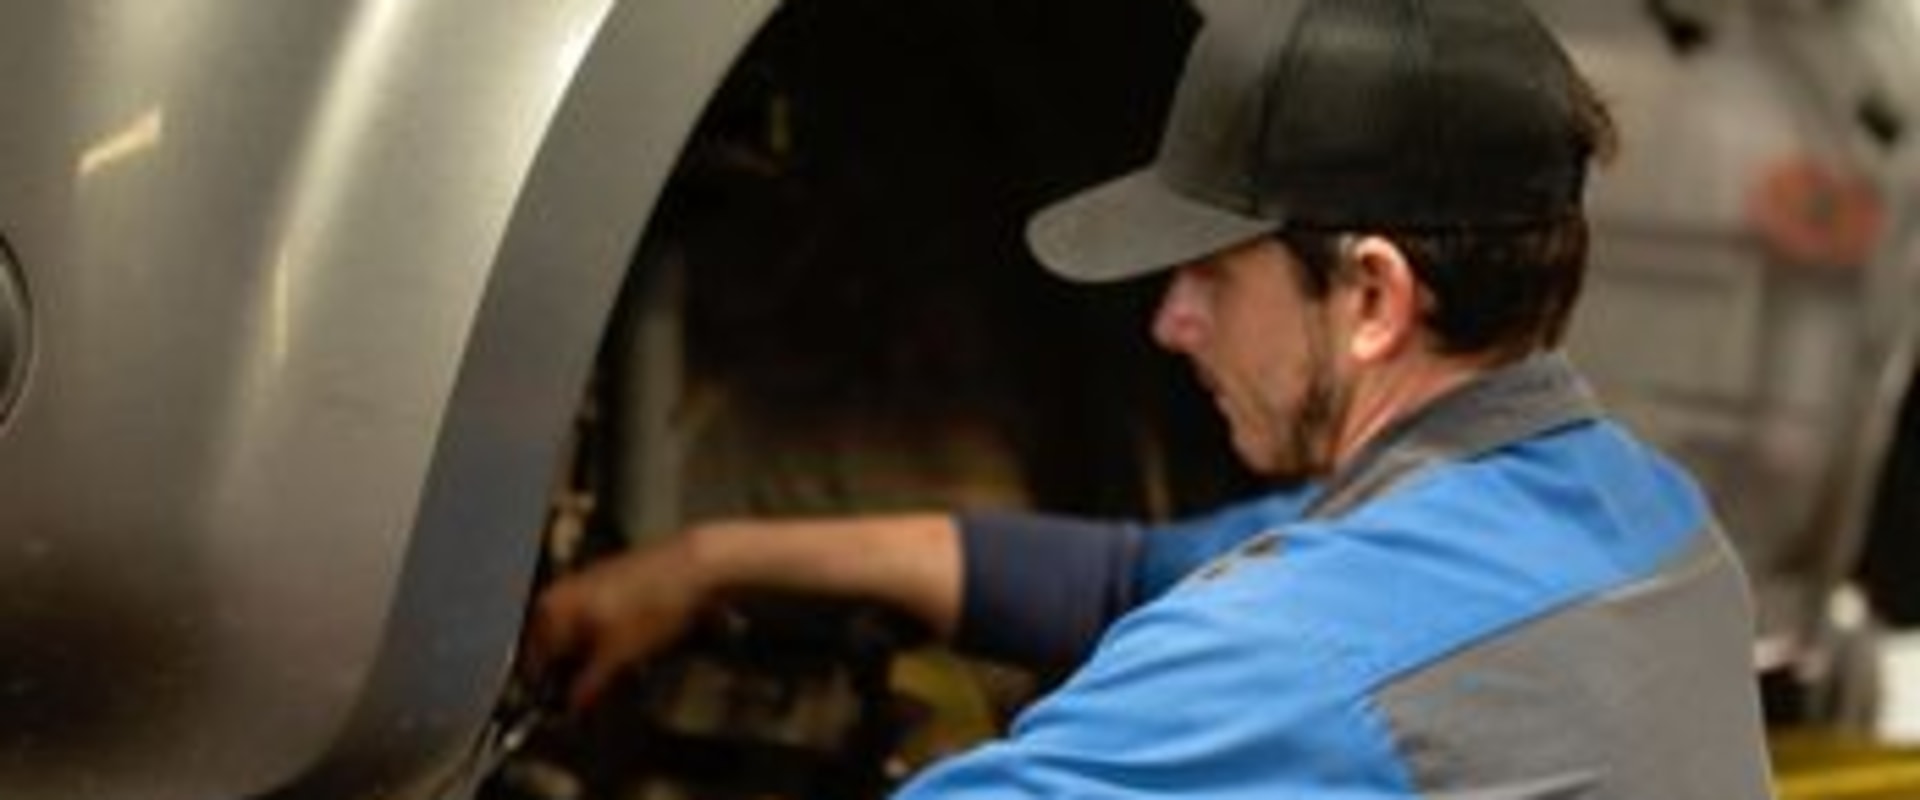 Finding the Best Auto Repair Shops Near You